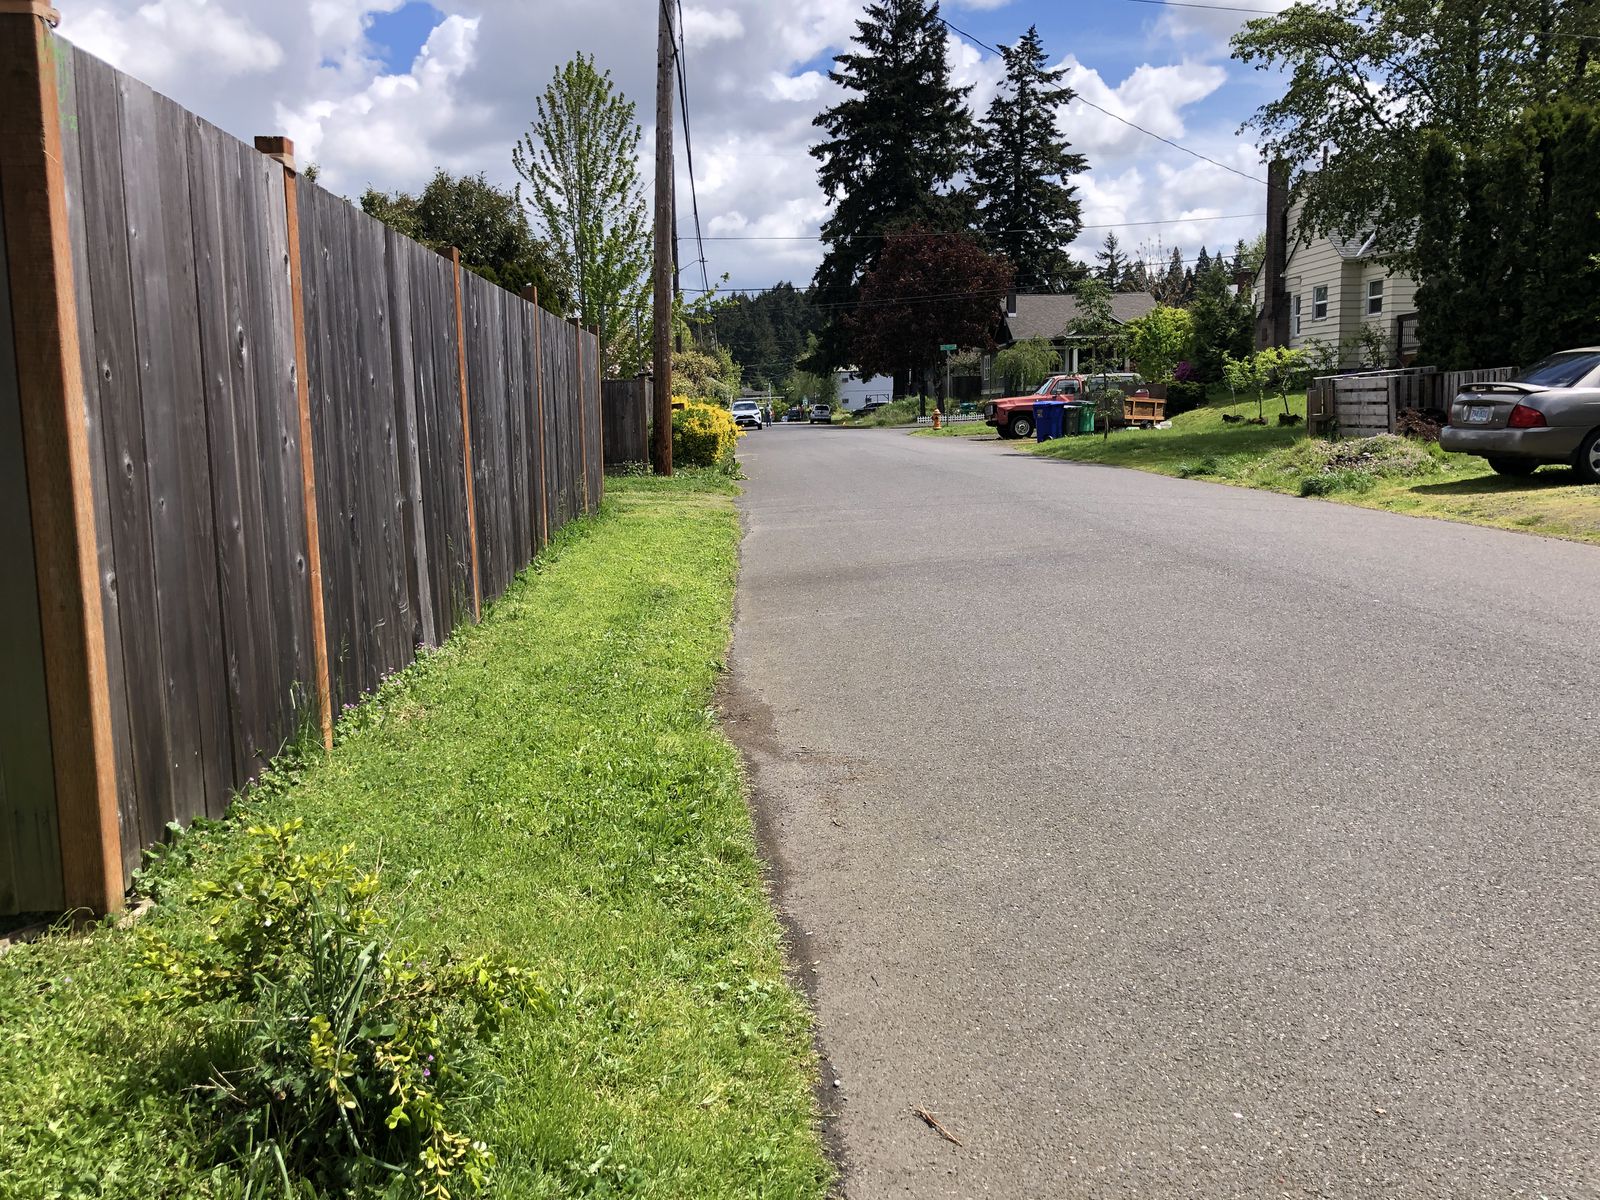 The stretch of Northeast Mason Street, between 78th and 79th avenues, where the shooting occurred. Police had pulled over a silver Lexus, which came to a stop on the side of the road near this fence, facing west toward 78th Avenue, residents said.